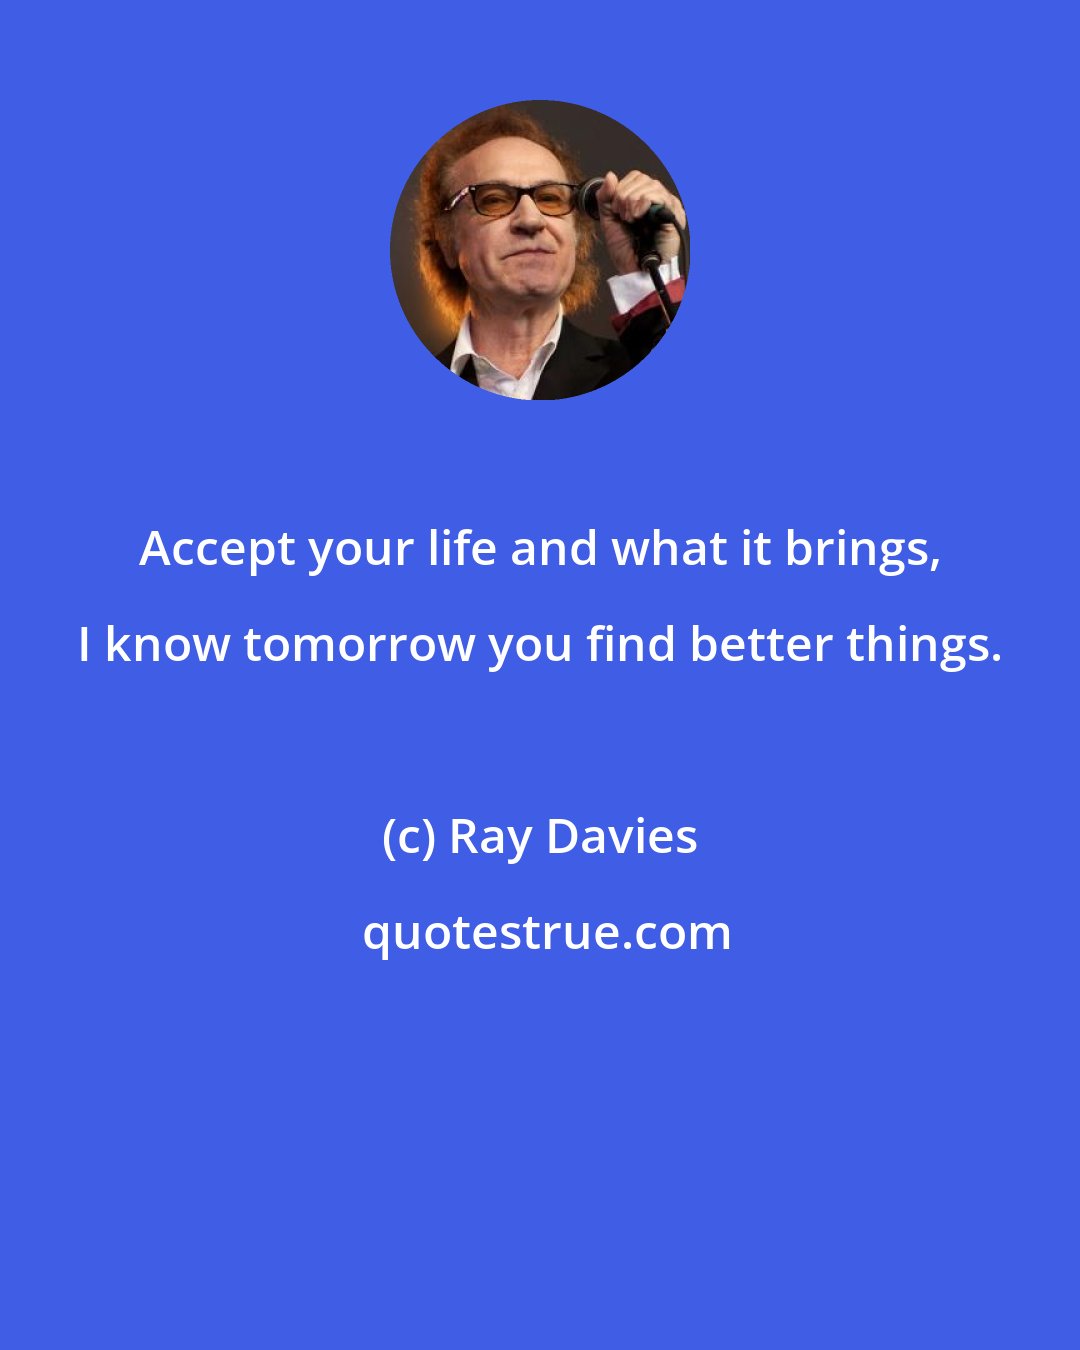 Ray Davies: Accept your life and what it brings, I know tomorrow you find better things.